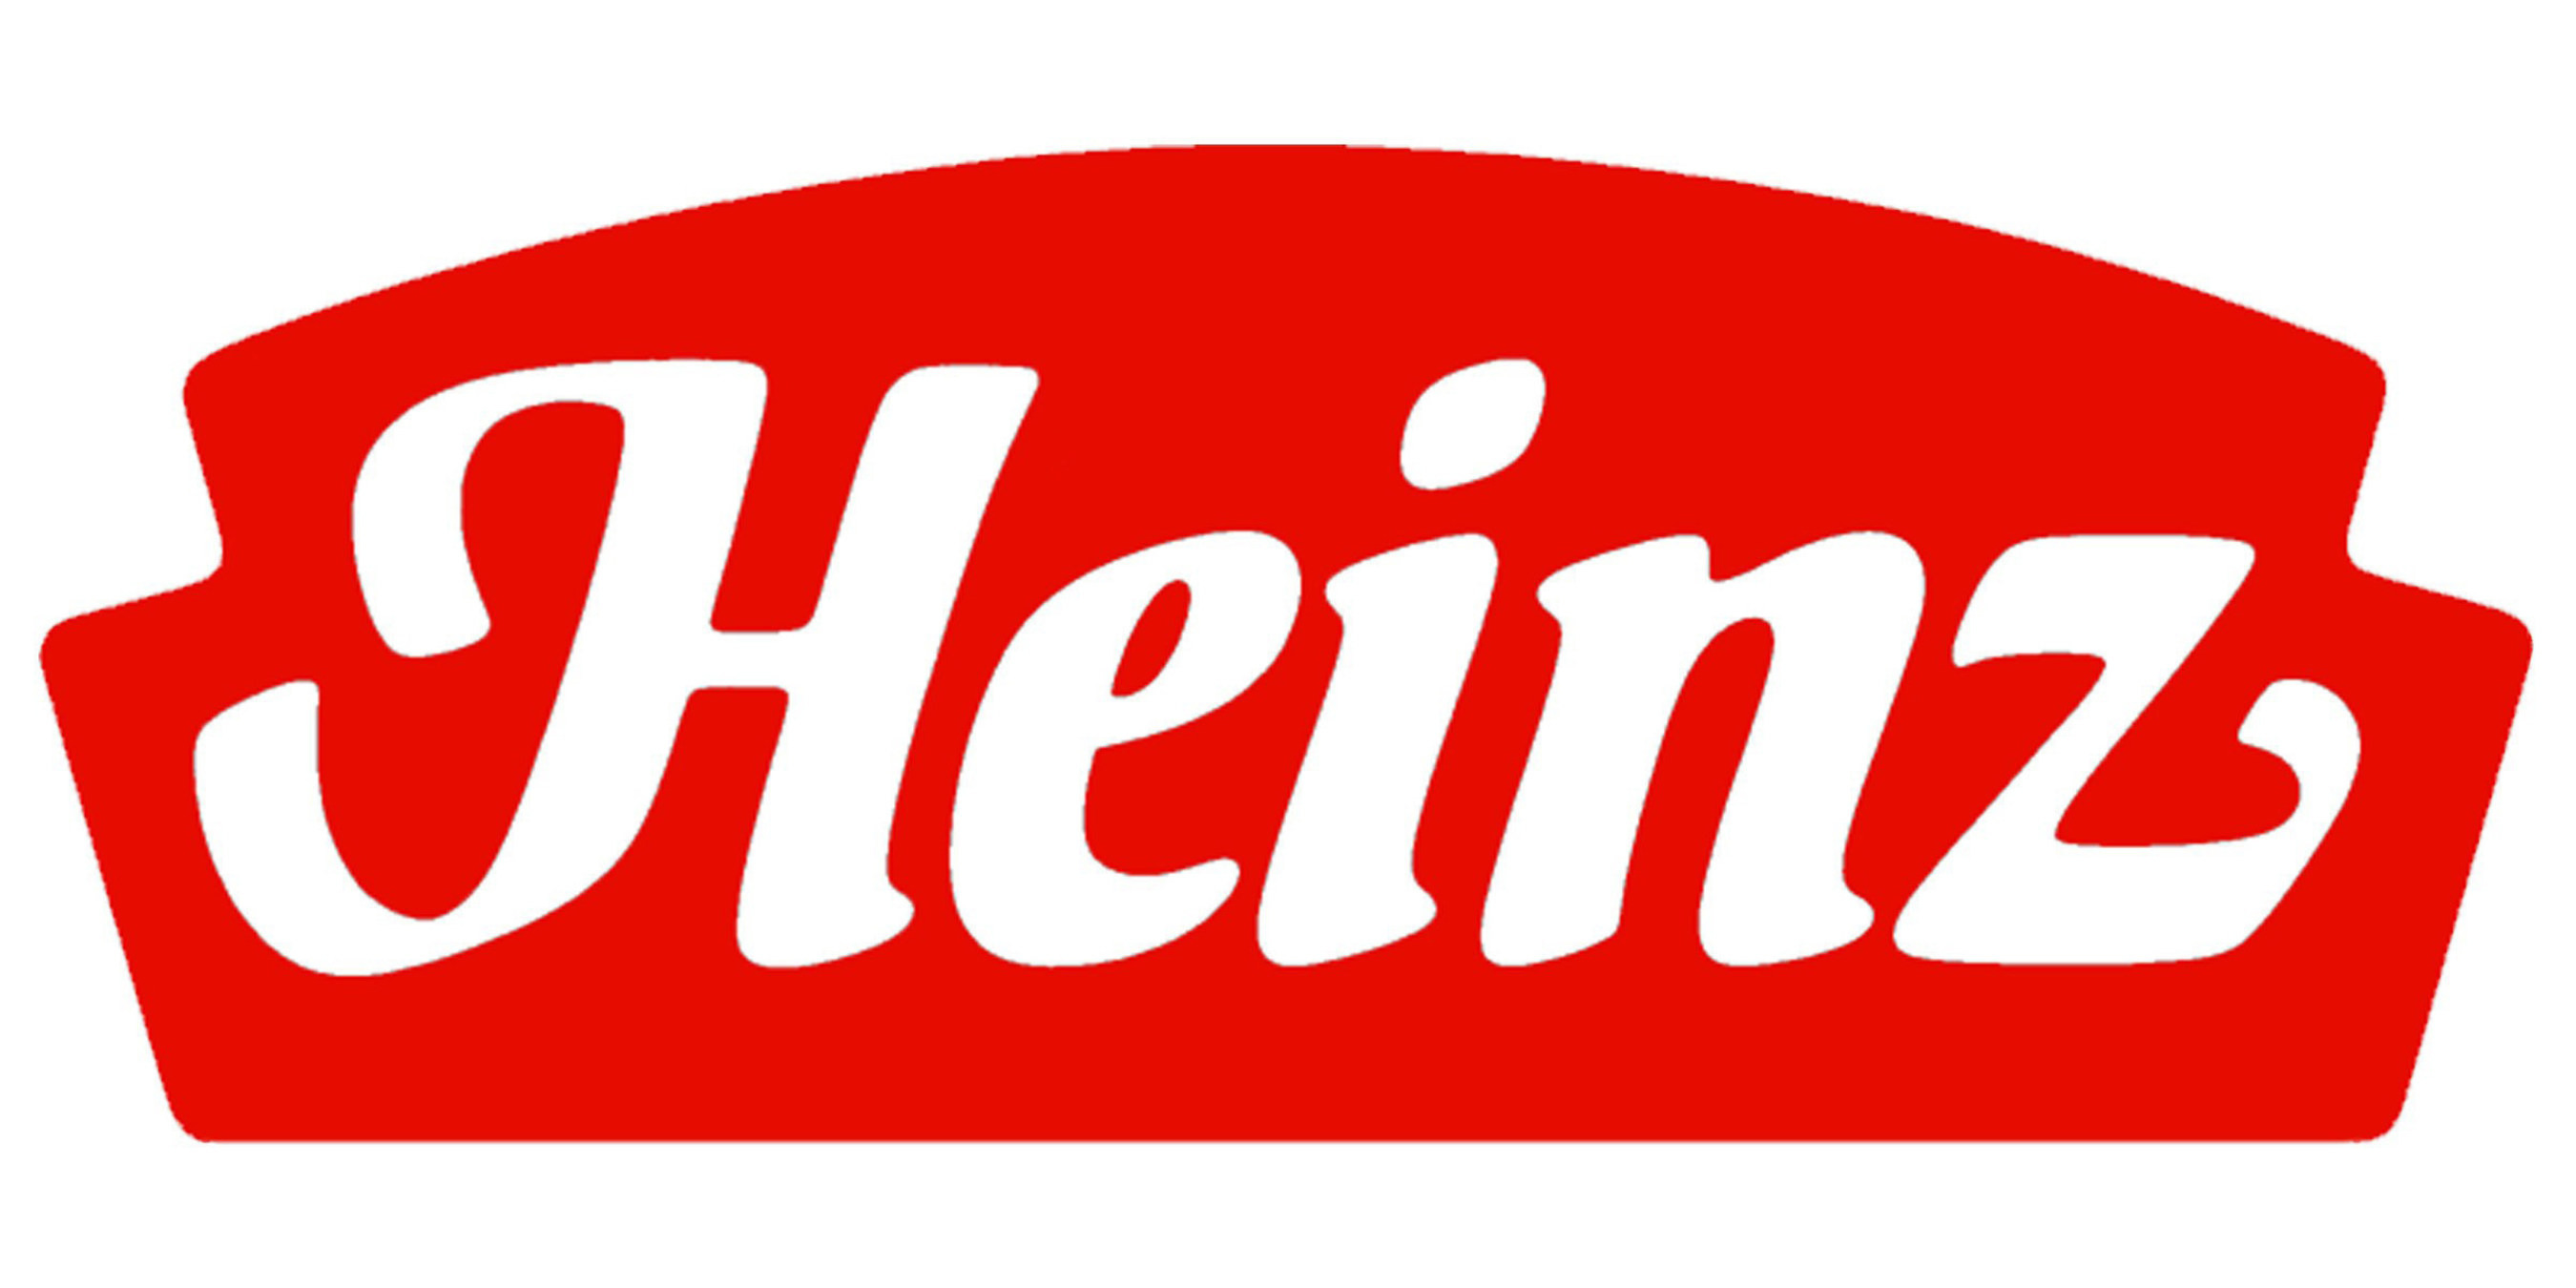 March 25, 2015 - H.J. Heinz Company and Kraft Foods Group (NASDAQ: KRFT) today announced that they have entered into a definitive merger agreement to create The Kraft Heinz Company, forming the third largest food company in North America with an unparalleled portfolio of iconic brands.